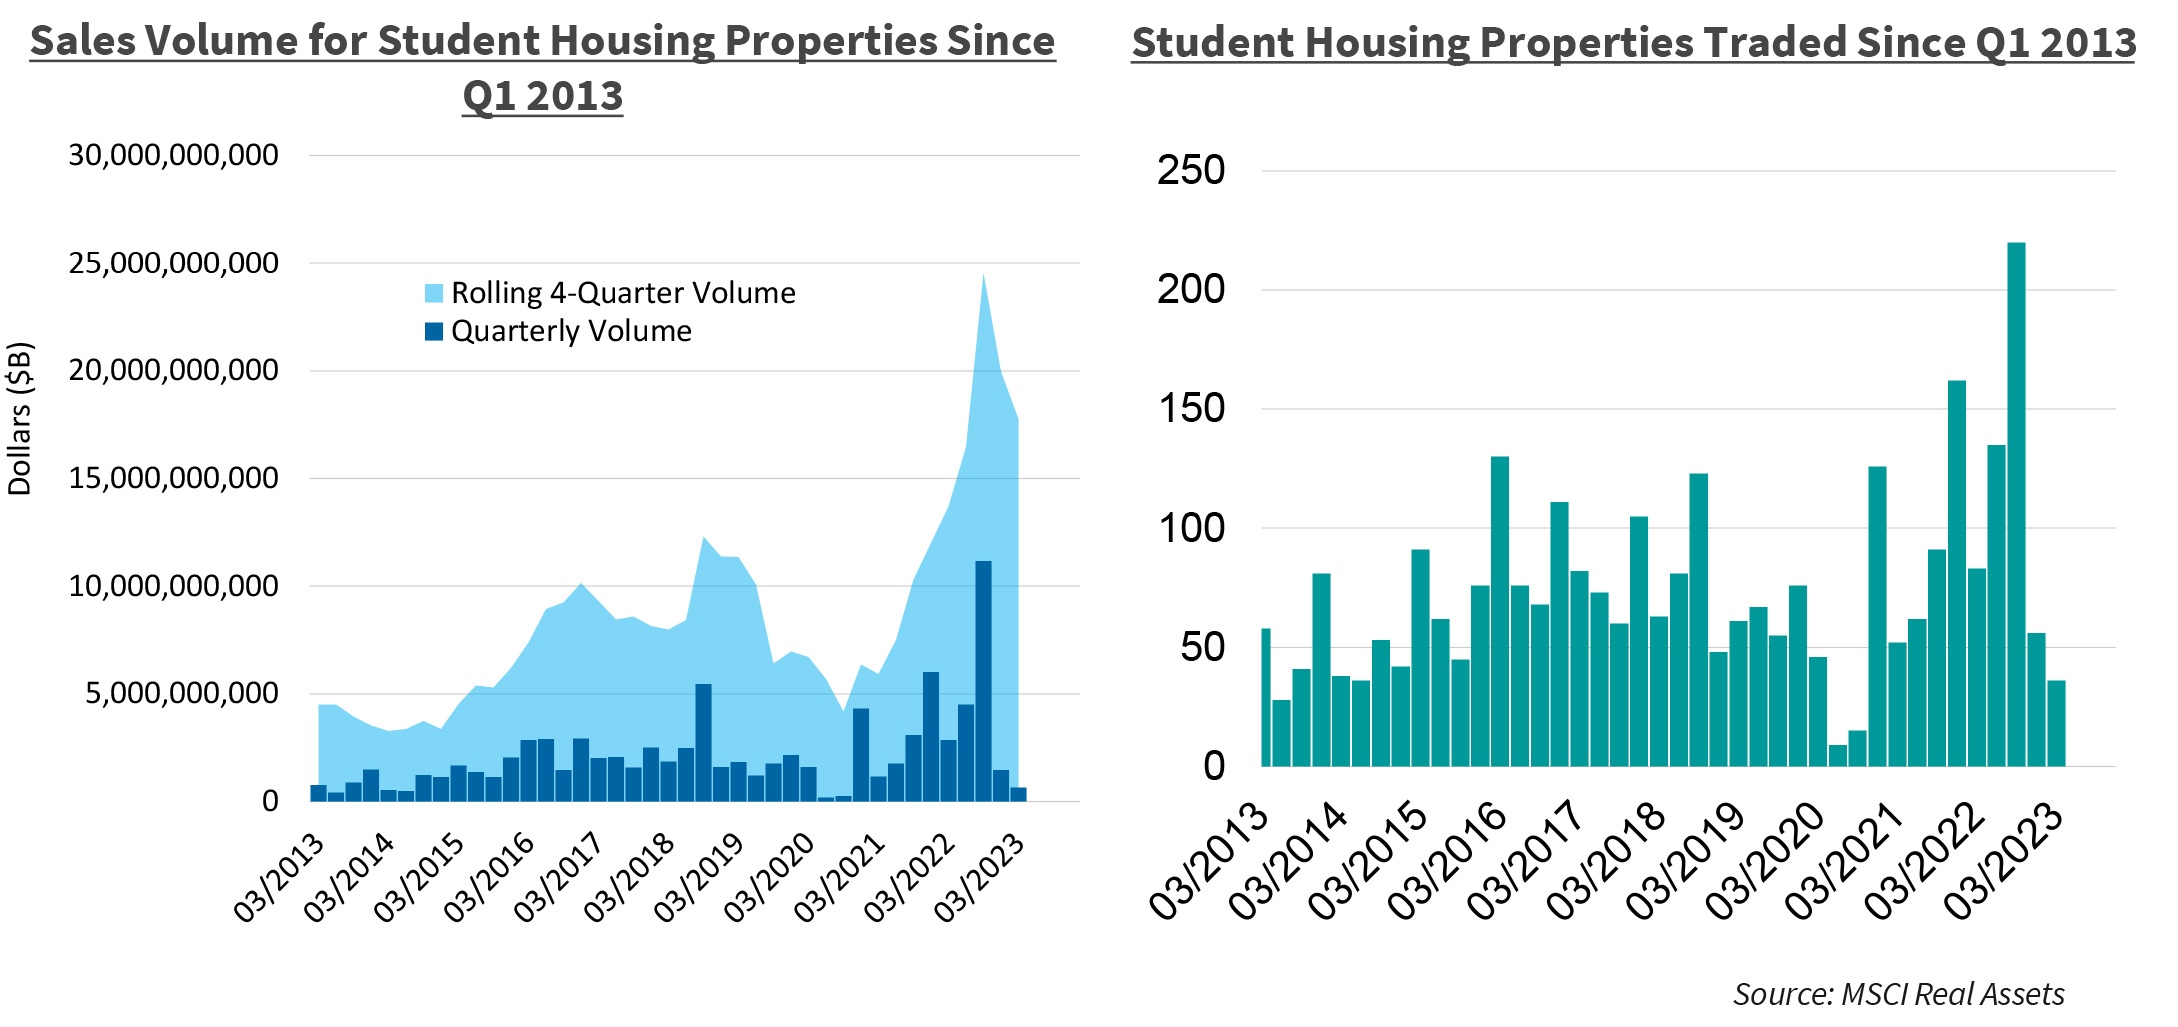 Sales Volume for Student Housing Properties Since Q1 2013 | Student Housing Properties Traded Since Q1 2013